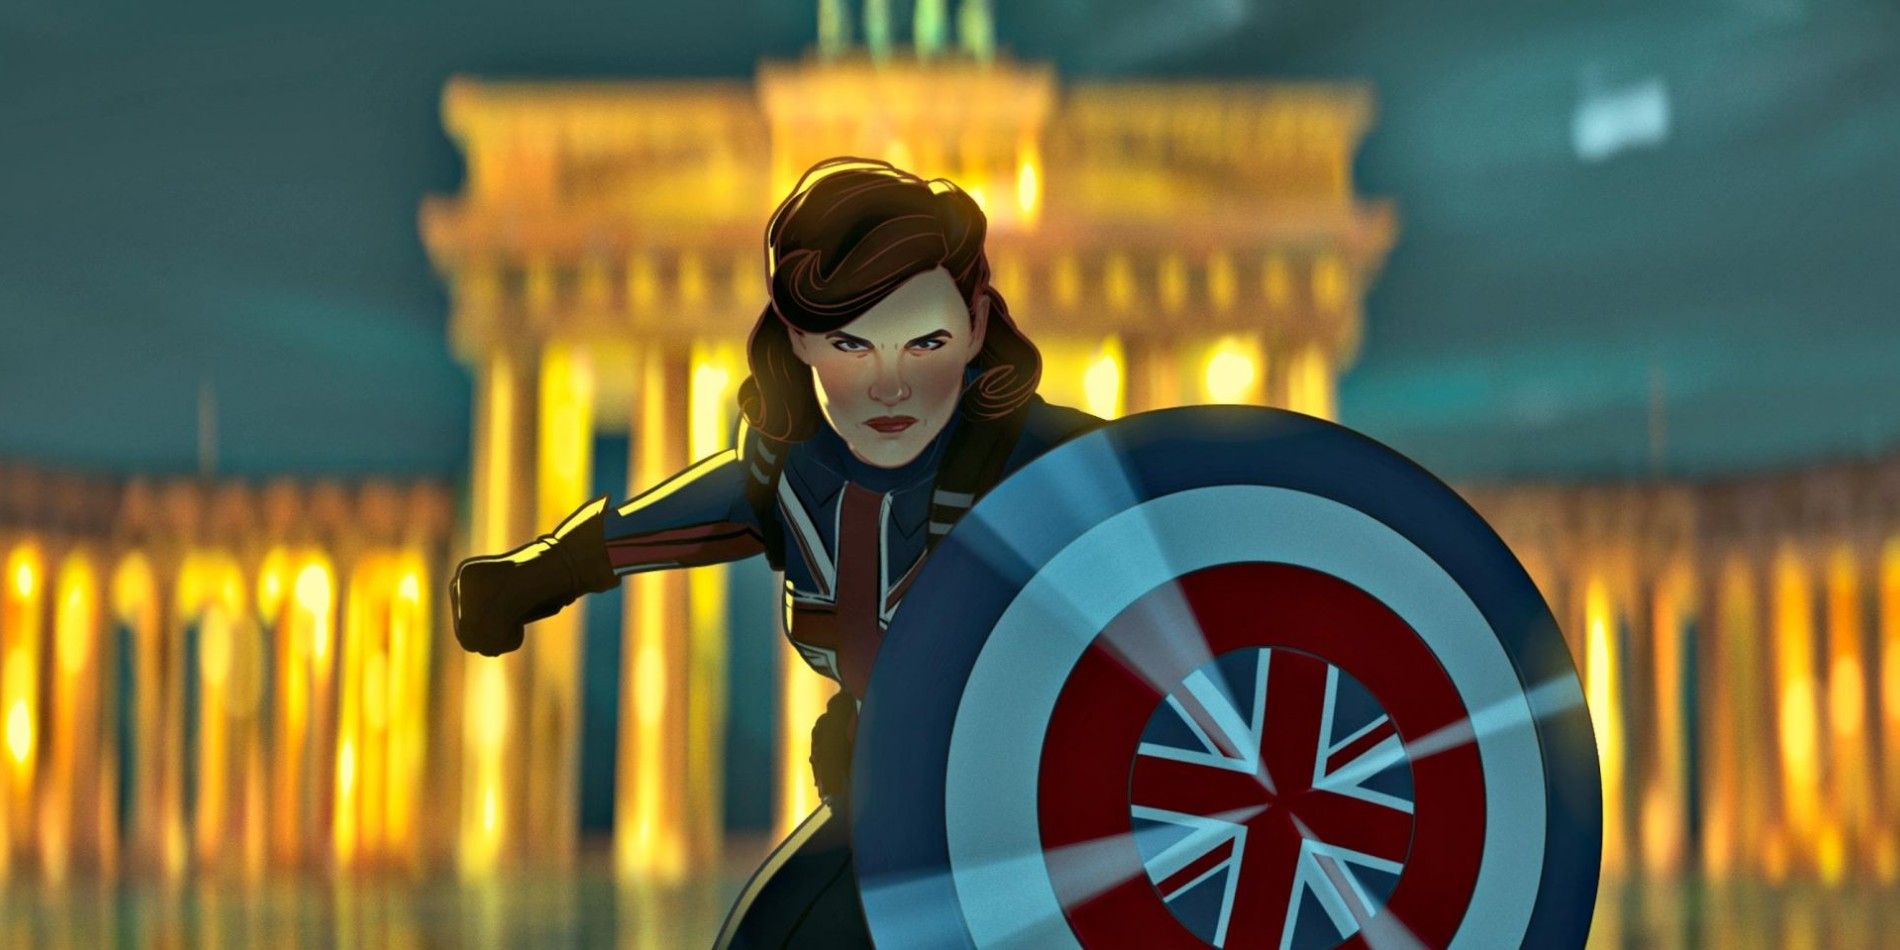 Peggy Carter poses with a shield in What If...?